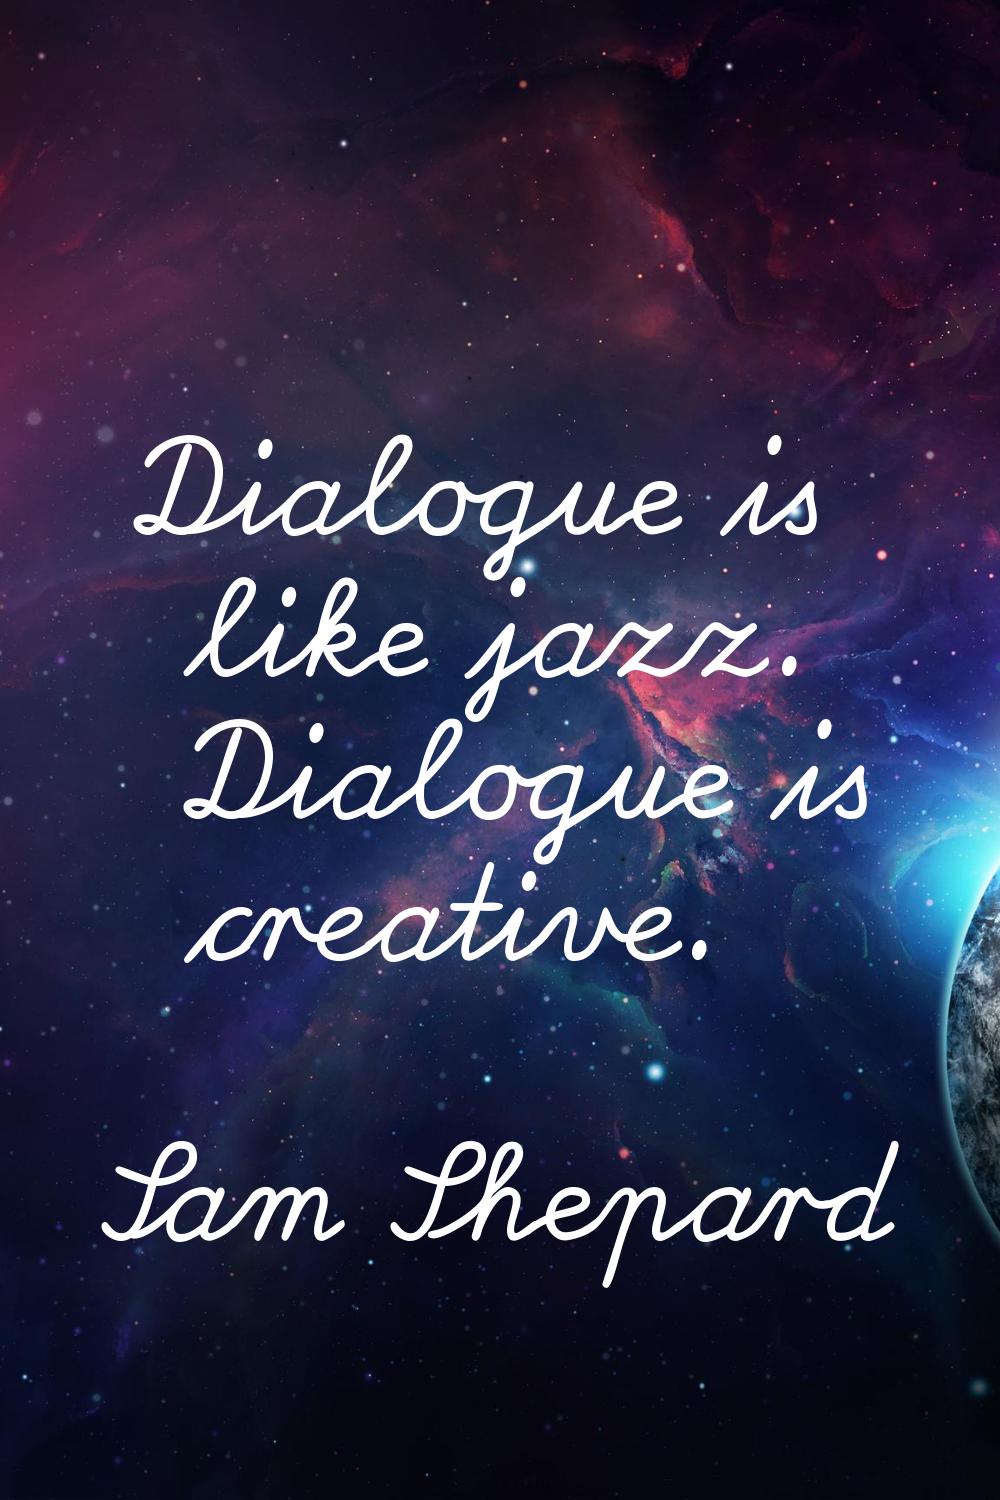 Dialogue is like jazz. Dialogue is creative.